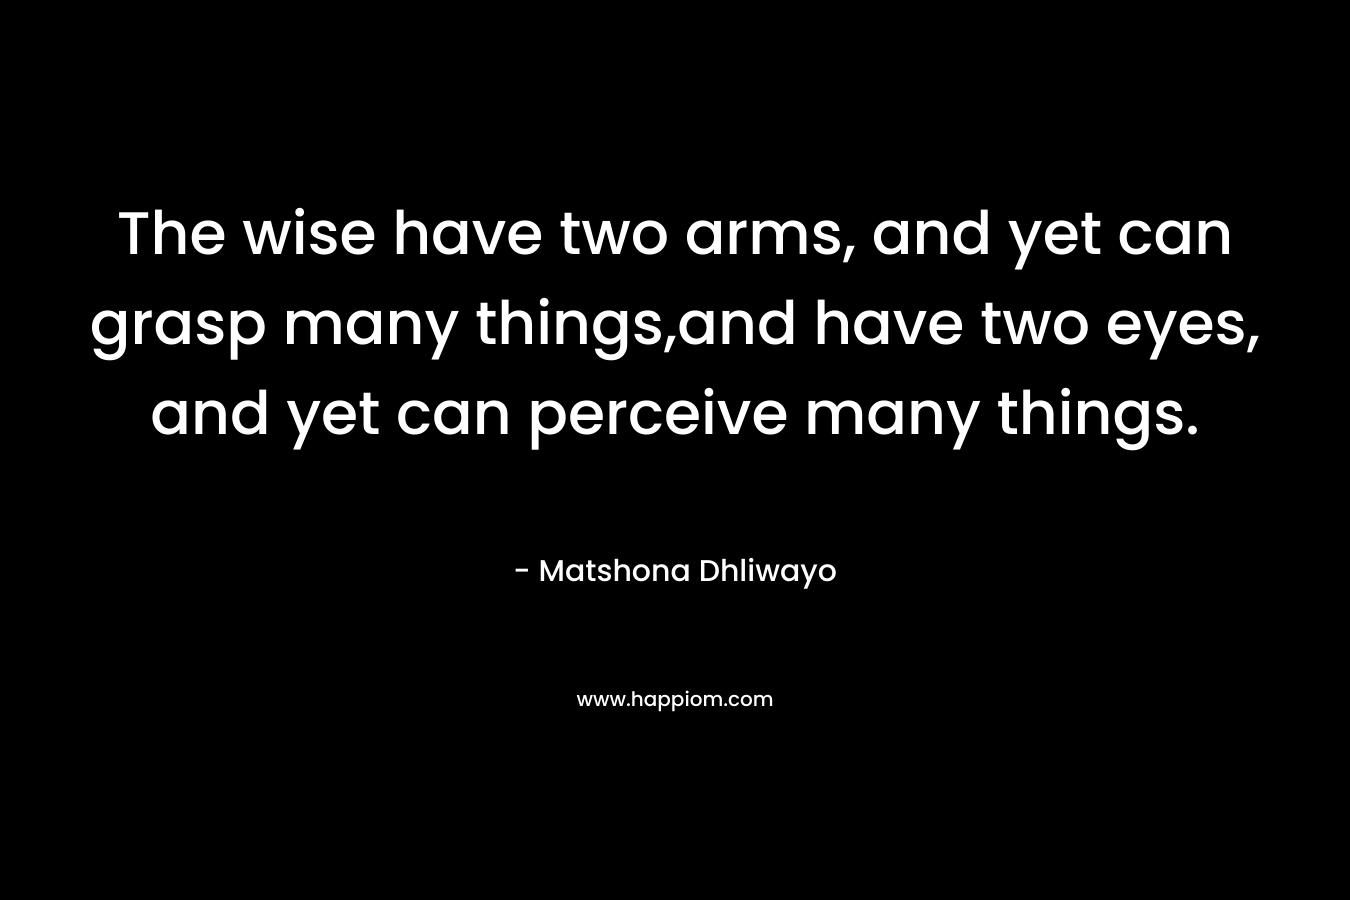 The wise have two arms, and yet can grasp many things,and have two eyes, and yet can perceive many things.